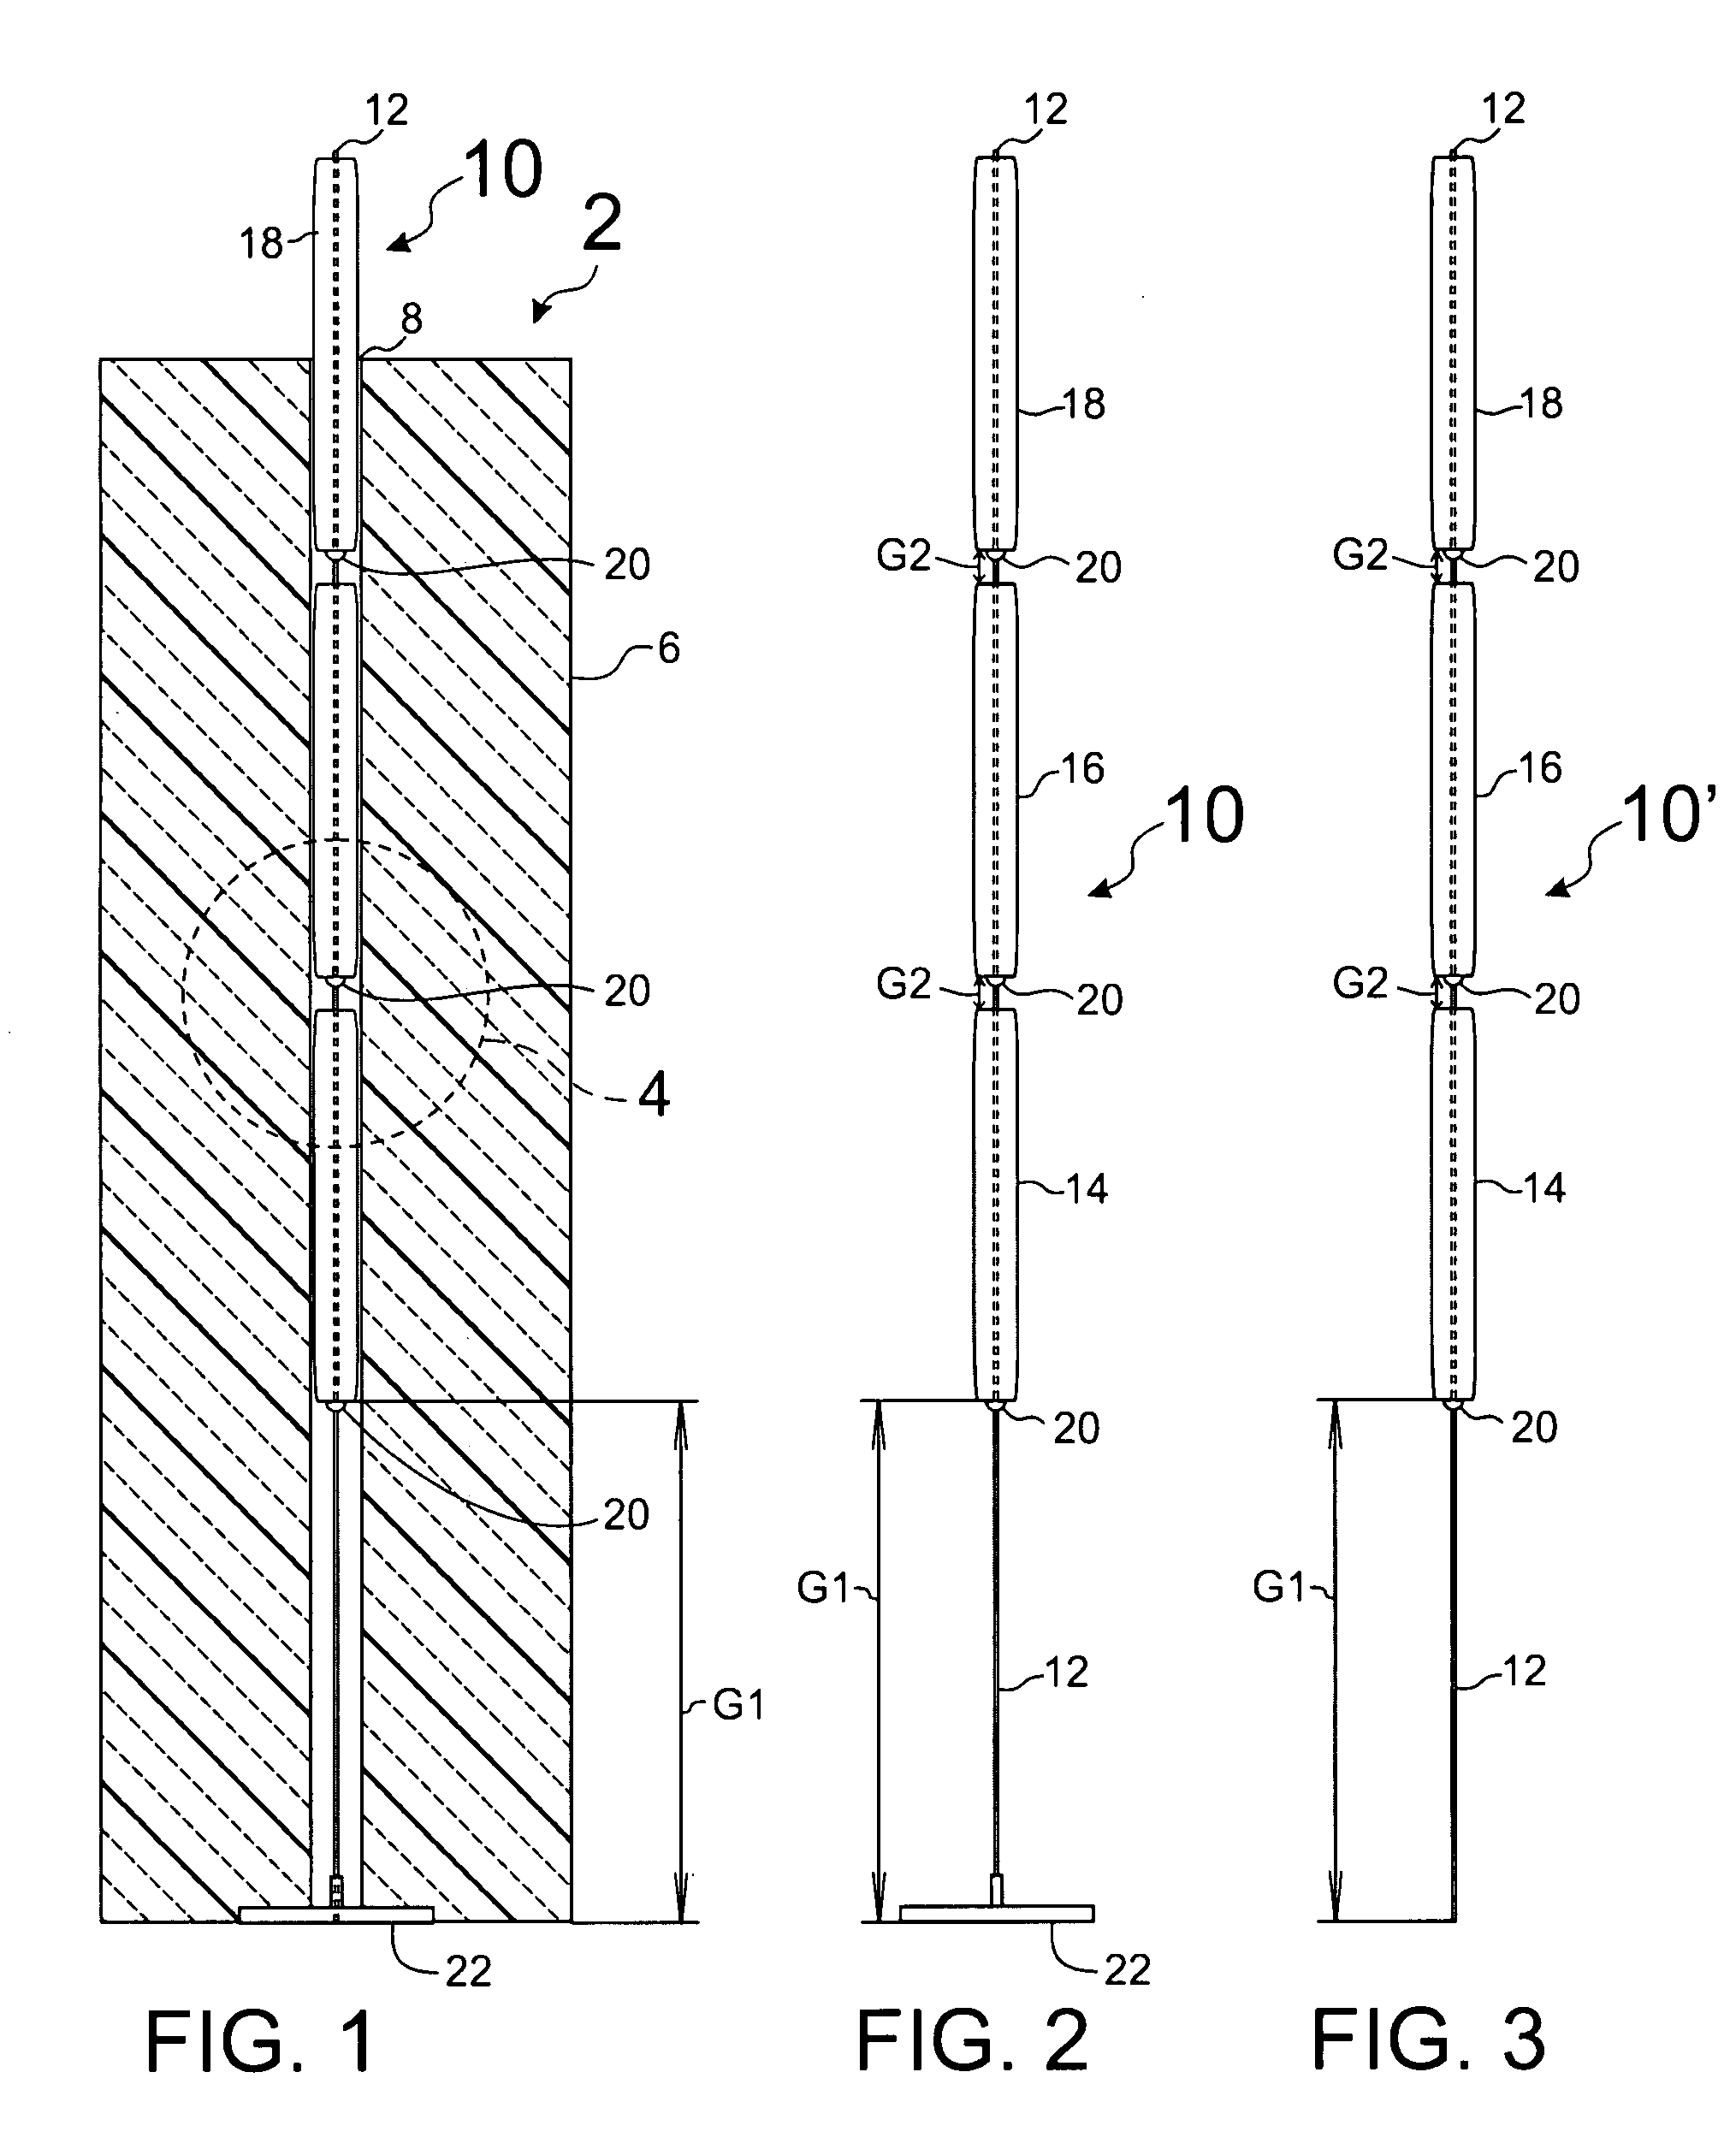 Self extinguishing safety candle wicks and methods of manufacture of the wicks